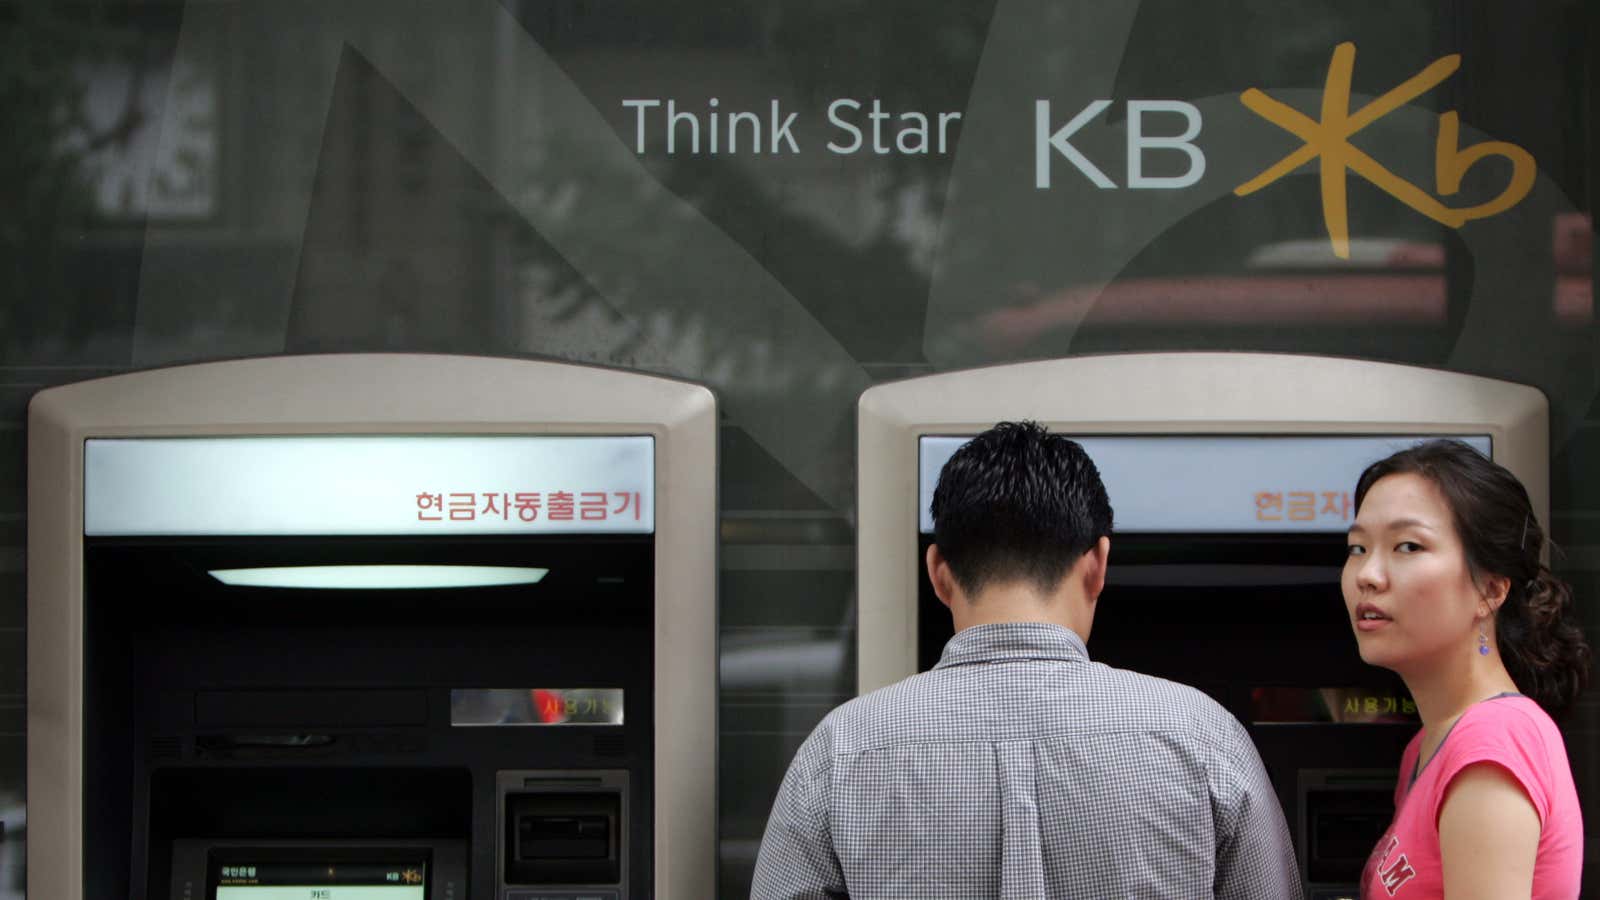 KB Financial may ditch 27 executives just to save face.